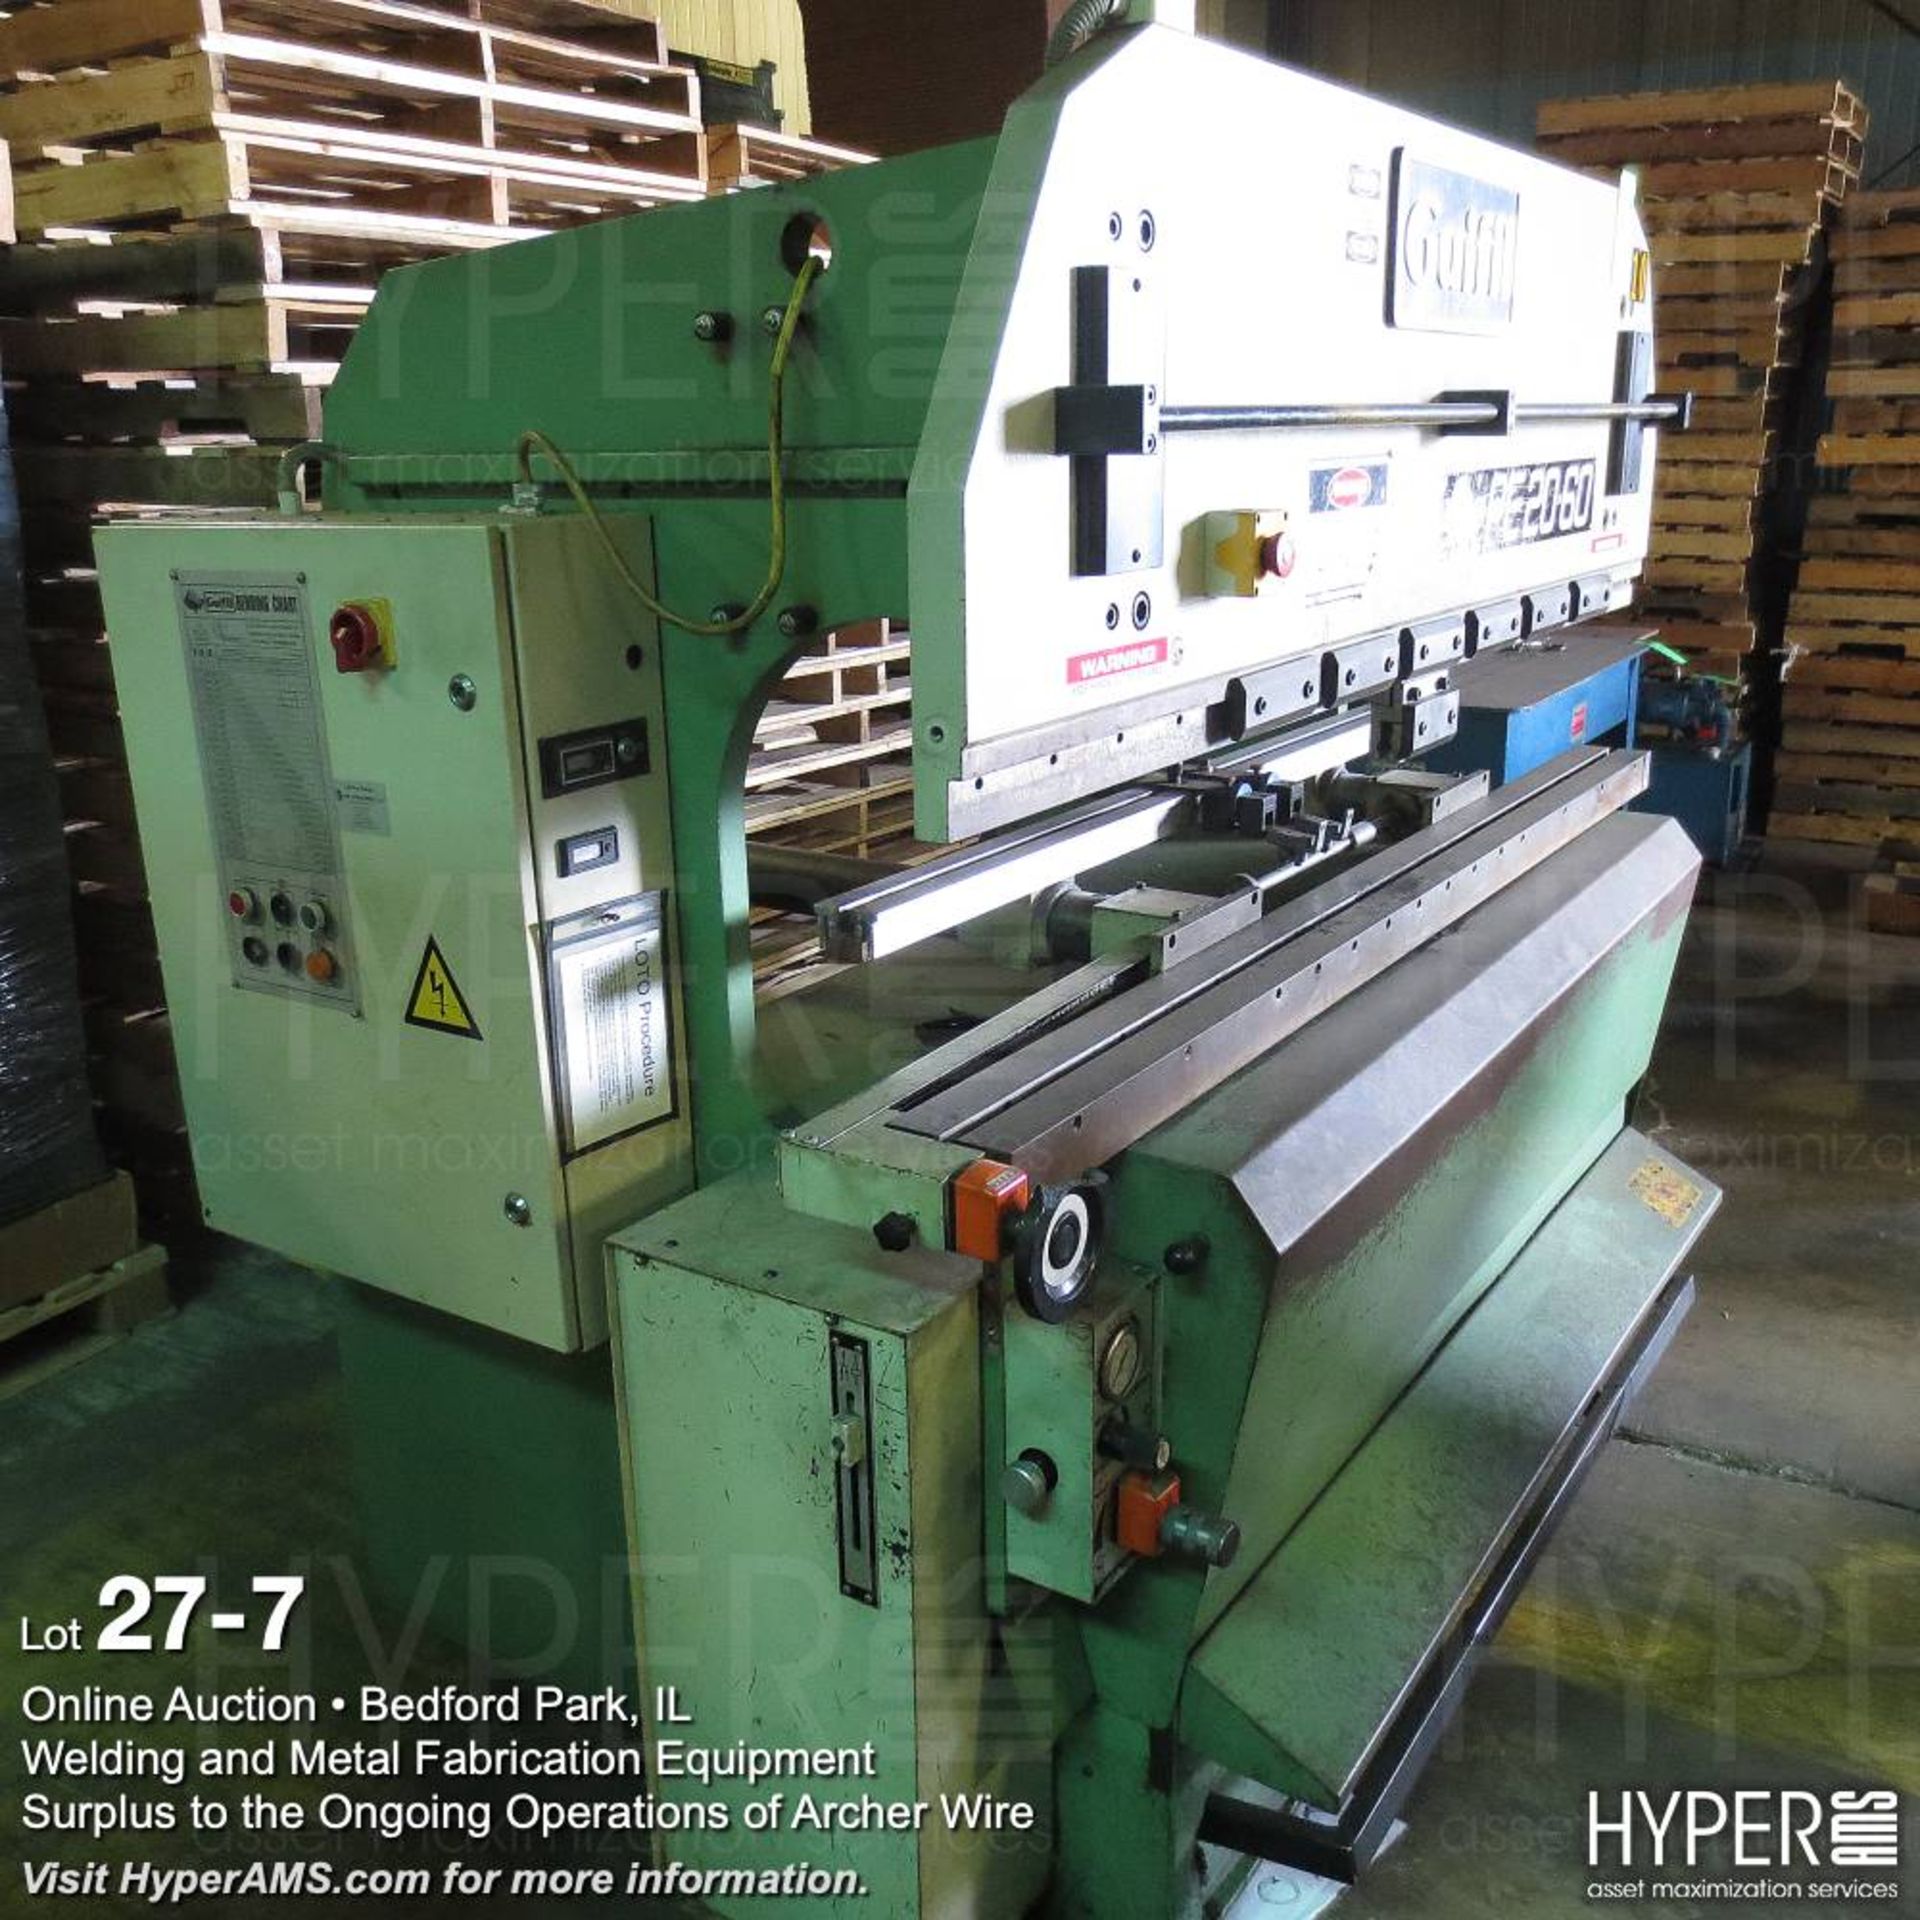 Guifil 66ton cap hydraulic press brake 79" bed, stroke 3.93, year 1993, number 013394, back gage, RE - Image 5 of 5